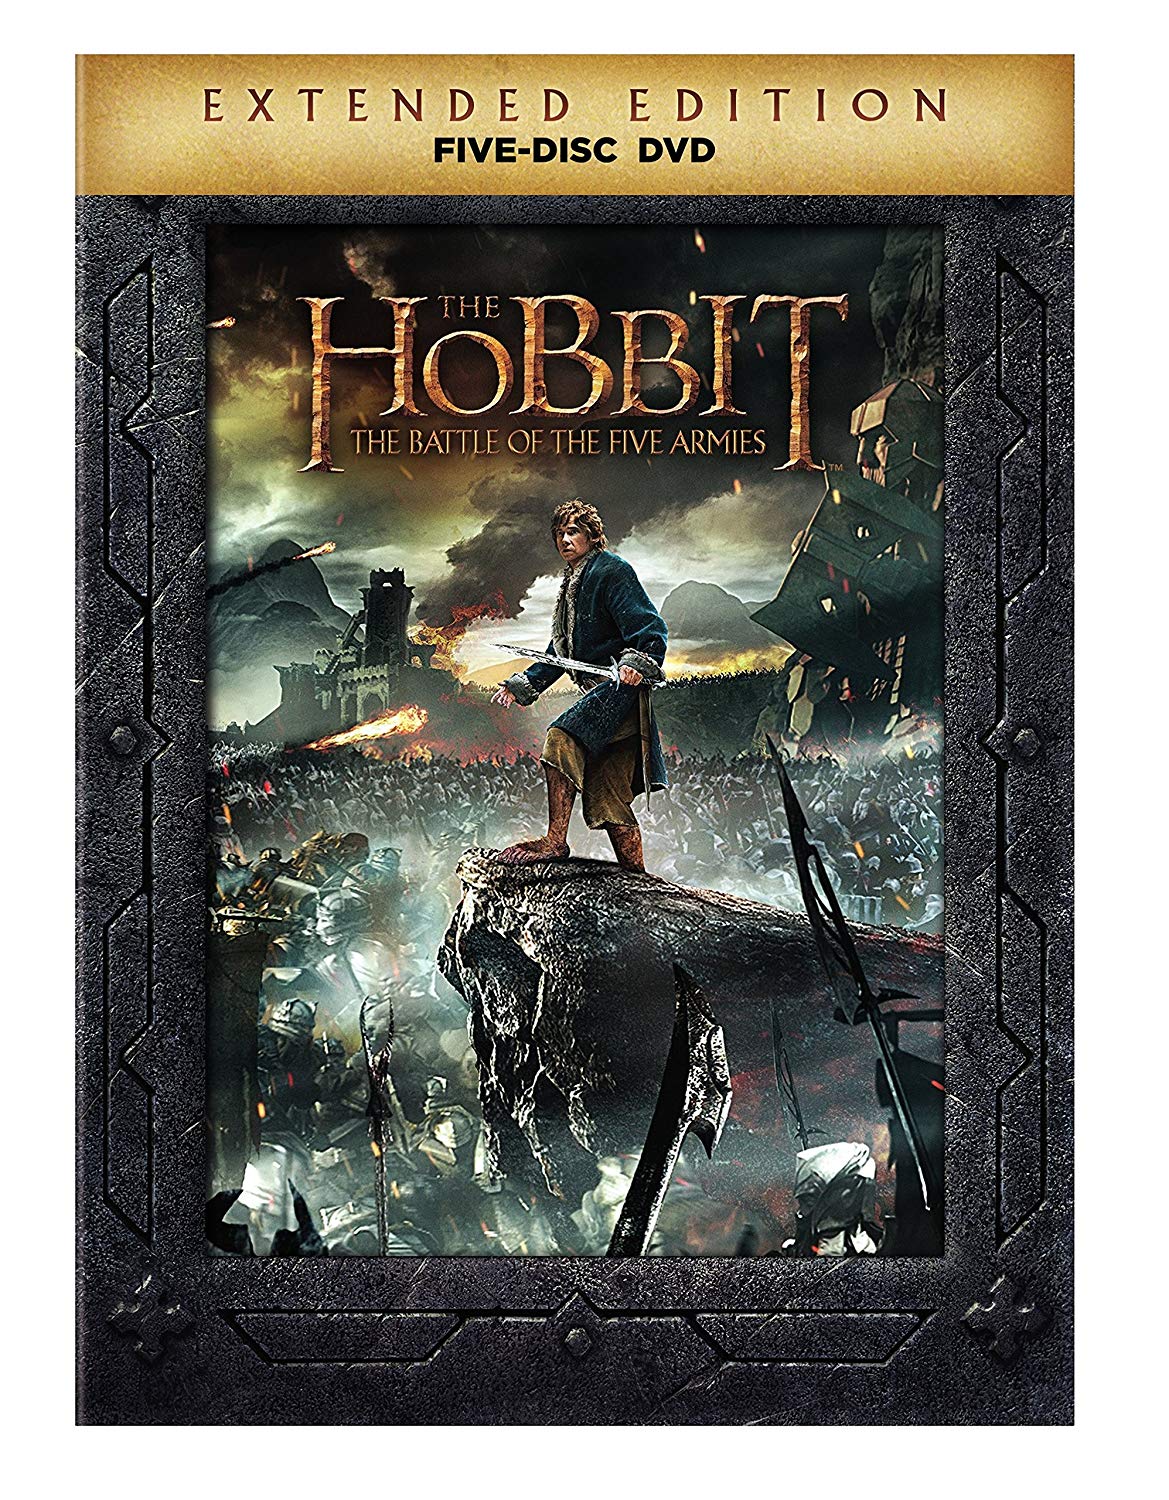 Review of The Hobbit: Battle of the Five Armies